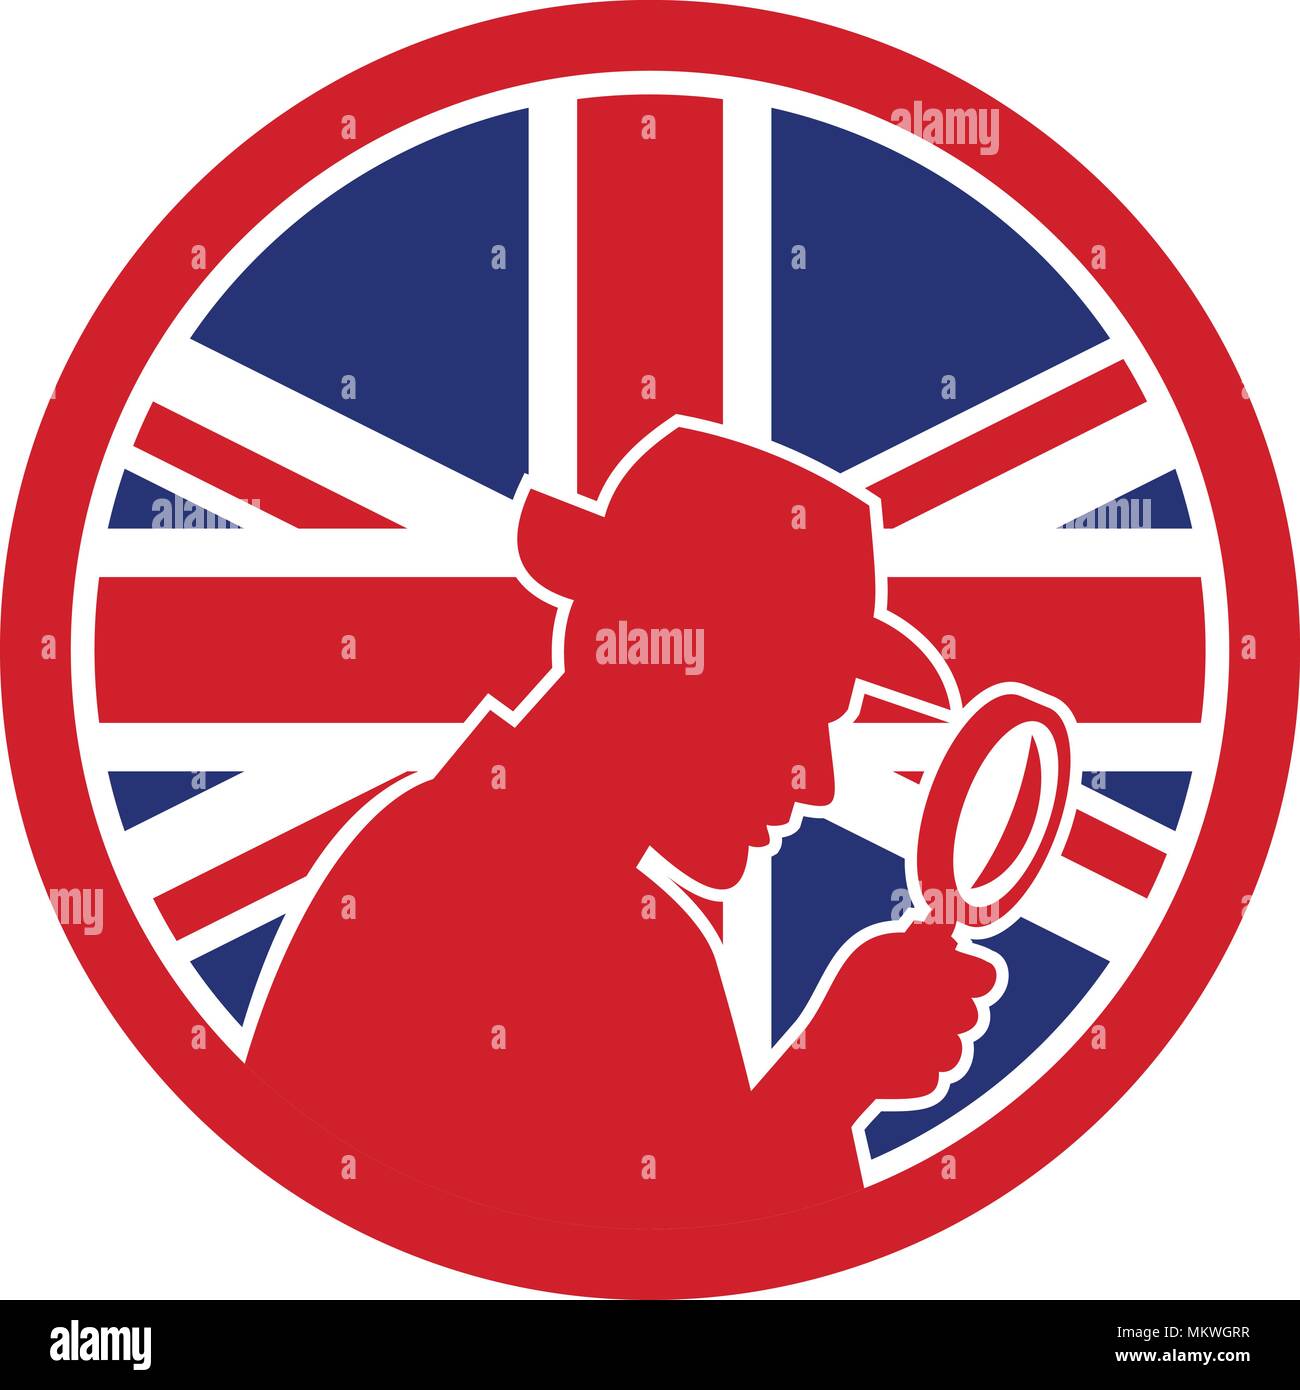 Icon retro style illustration of a British private investigator silhouette with magnifying glass   United Kingdom UK, Great Britain Union Jack flag. Stock Vector